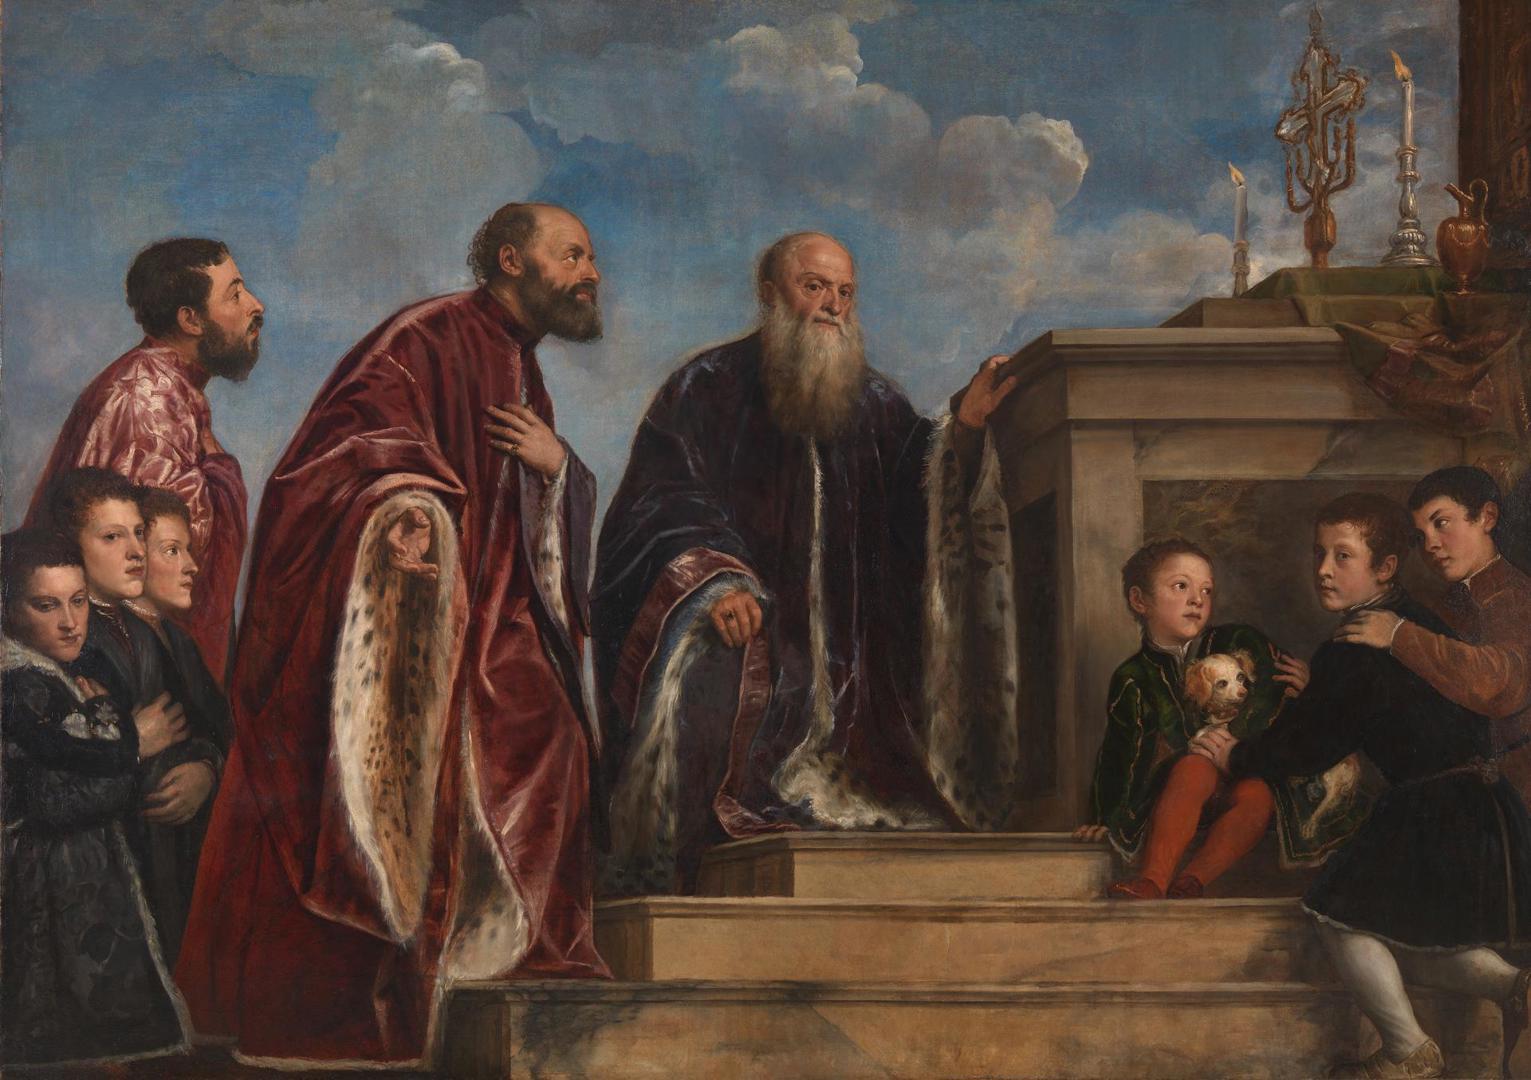 The Vendramin Family by Titian